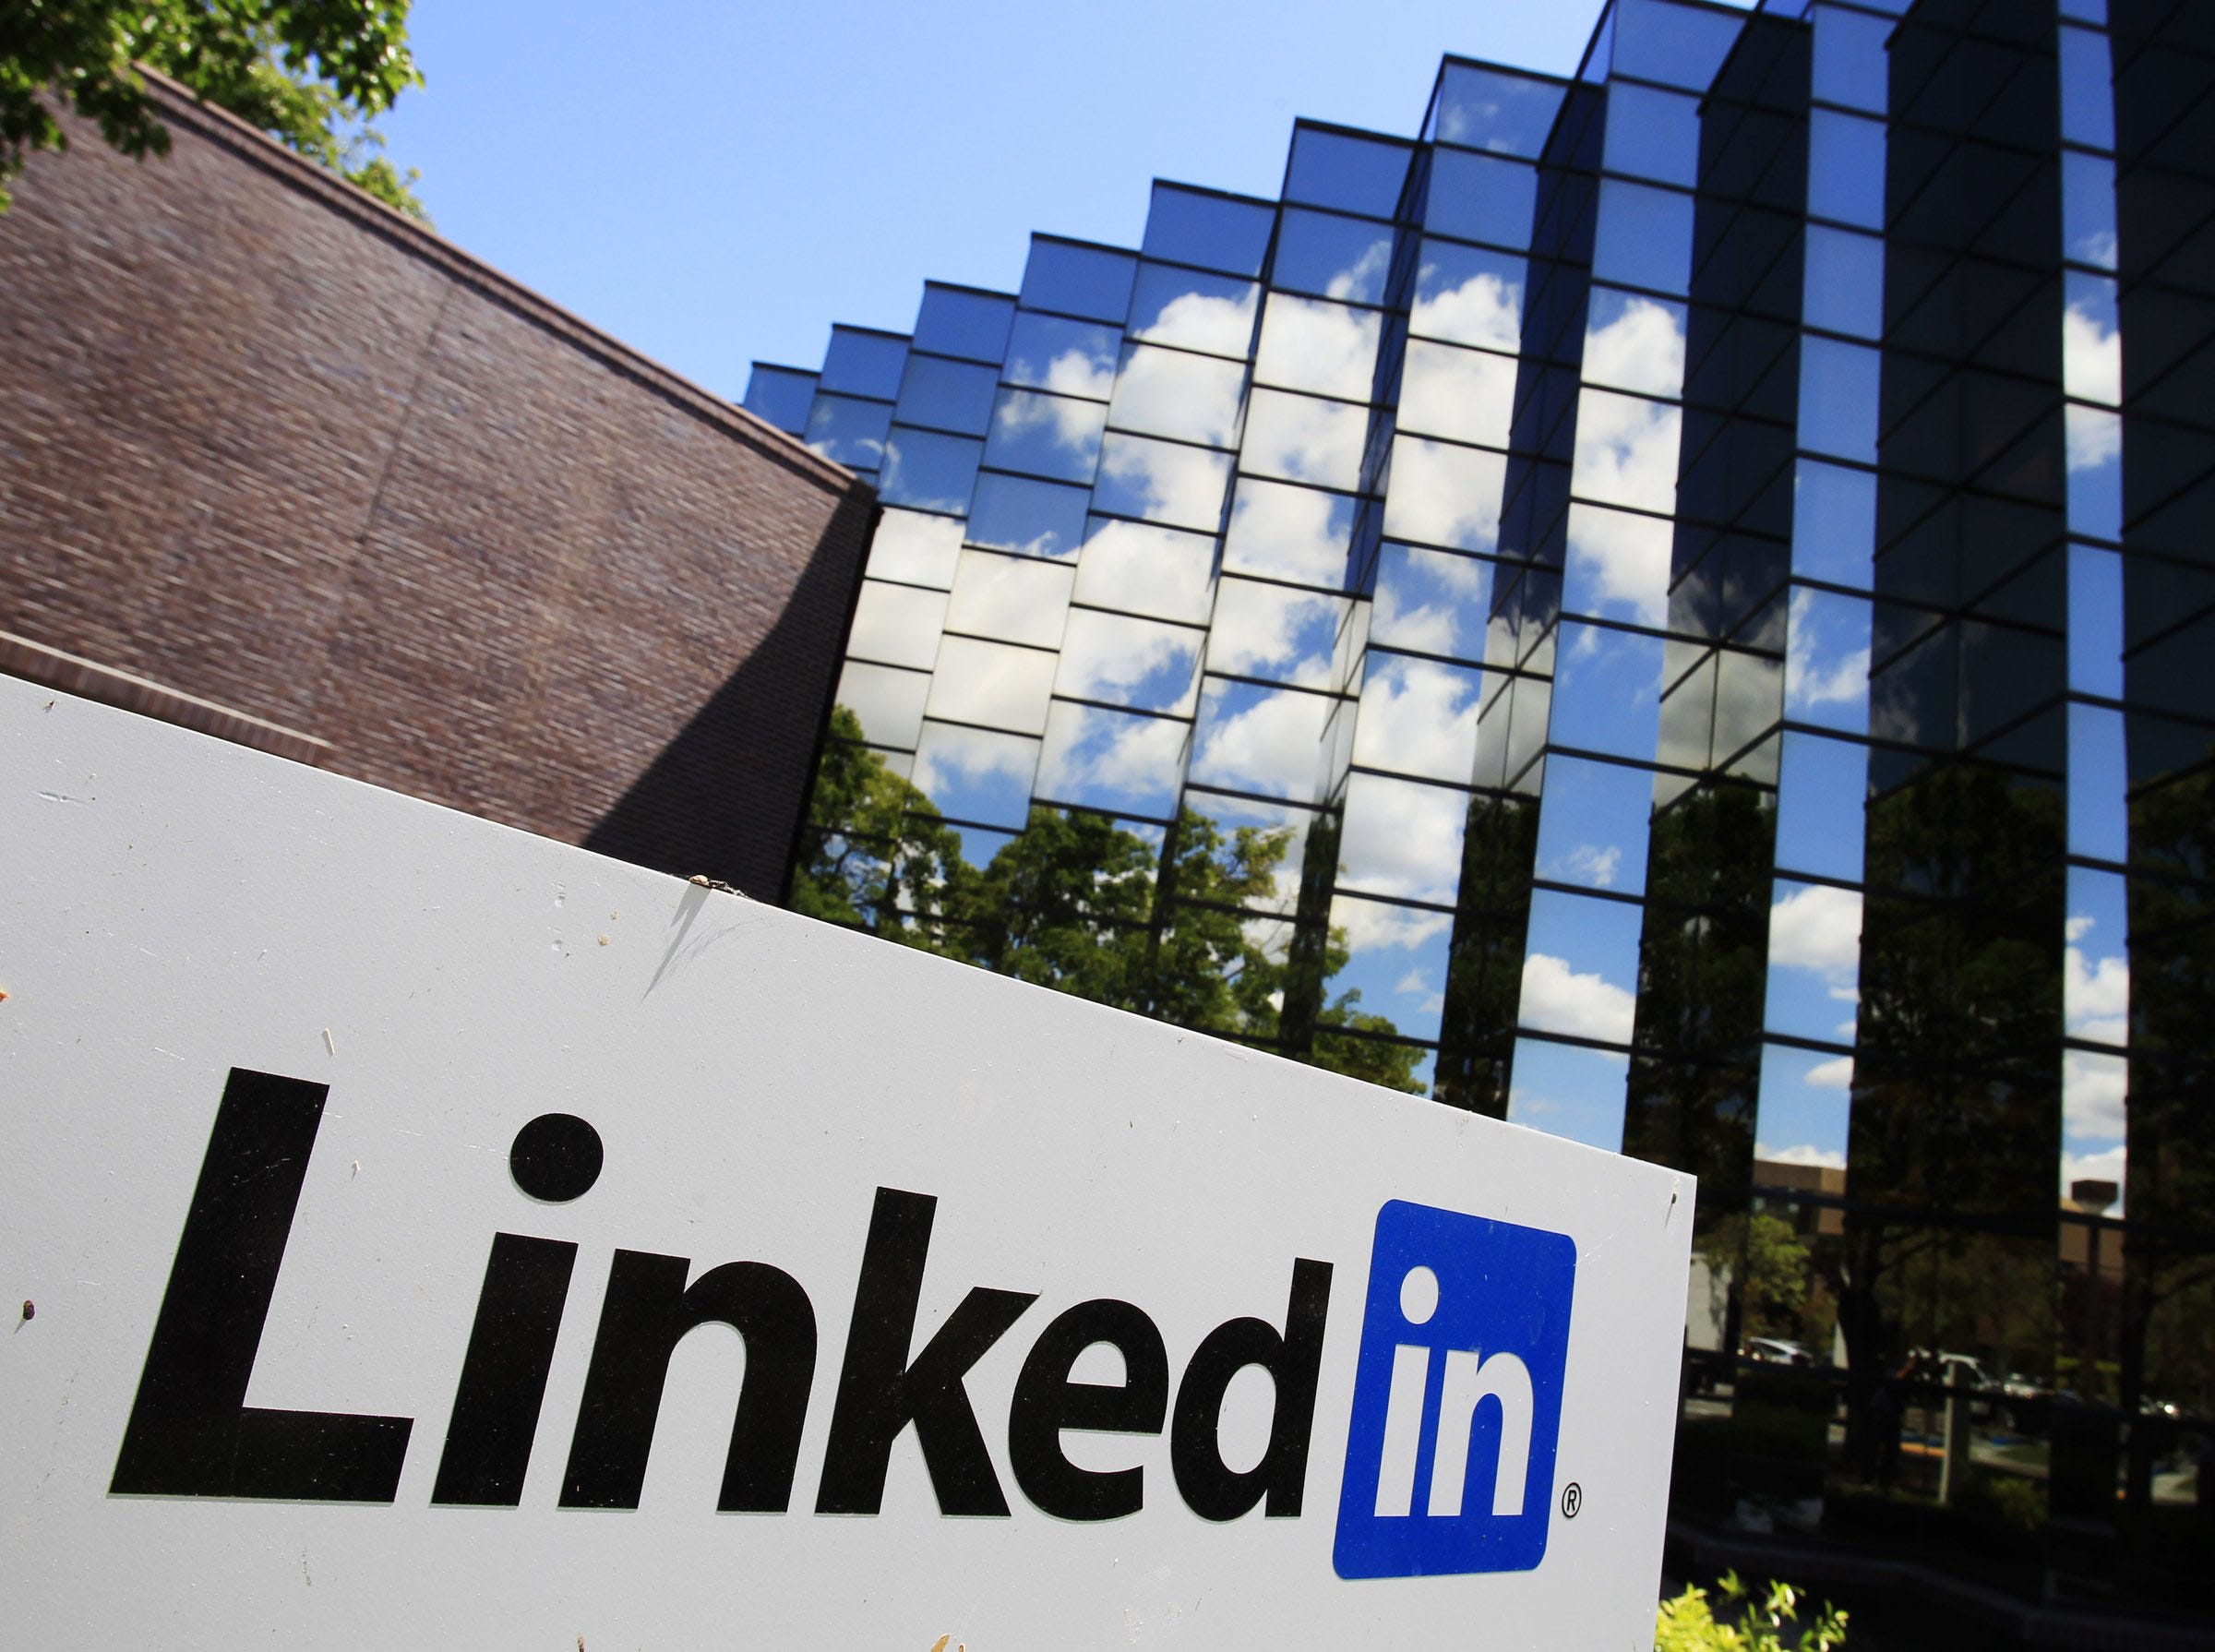 Interviewing for jobs? LinkedIn lets you get advice from friends first